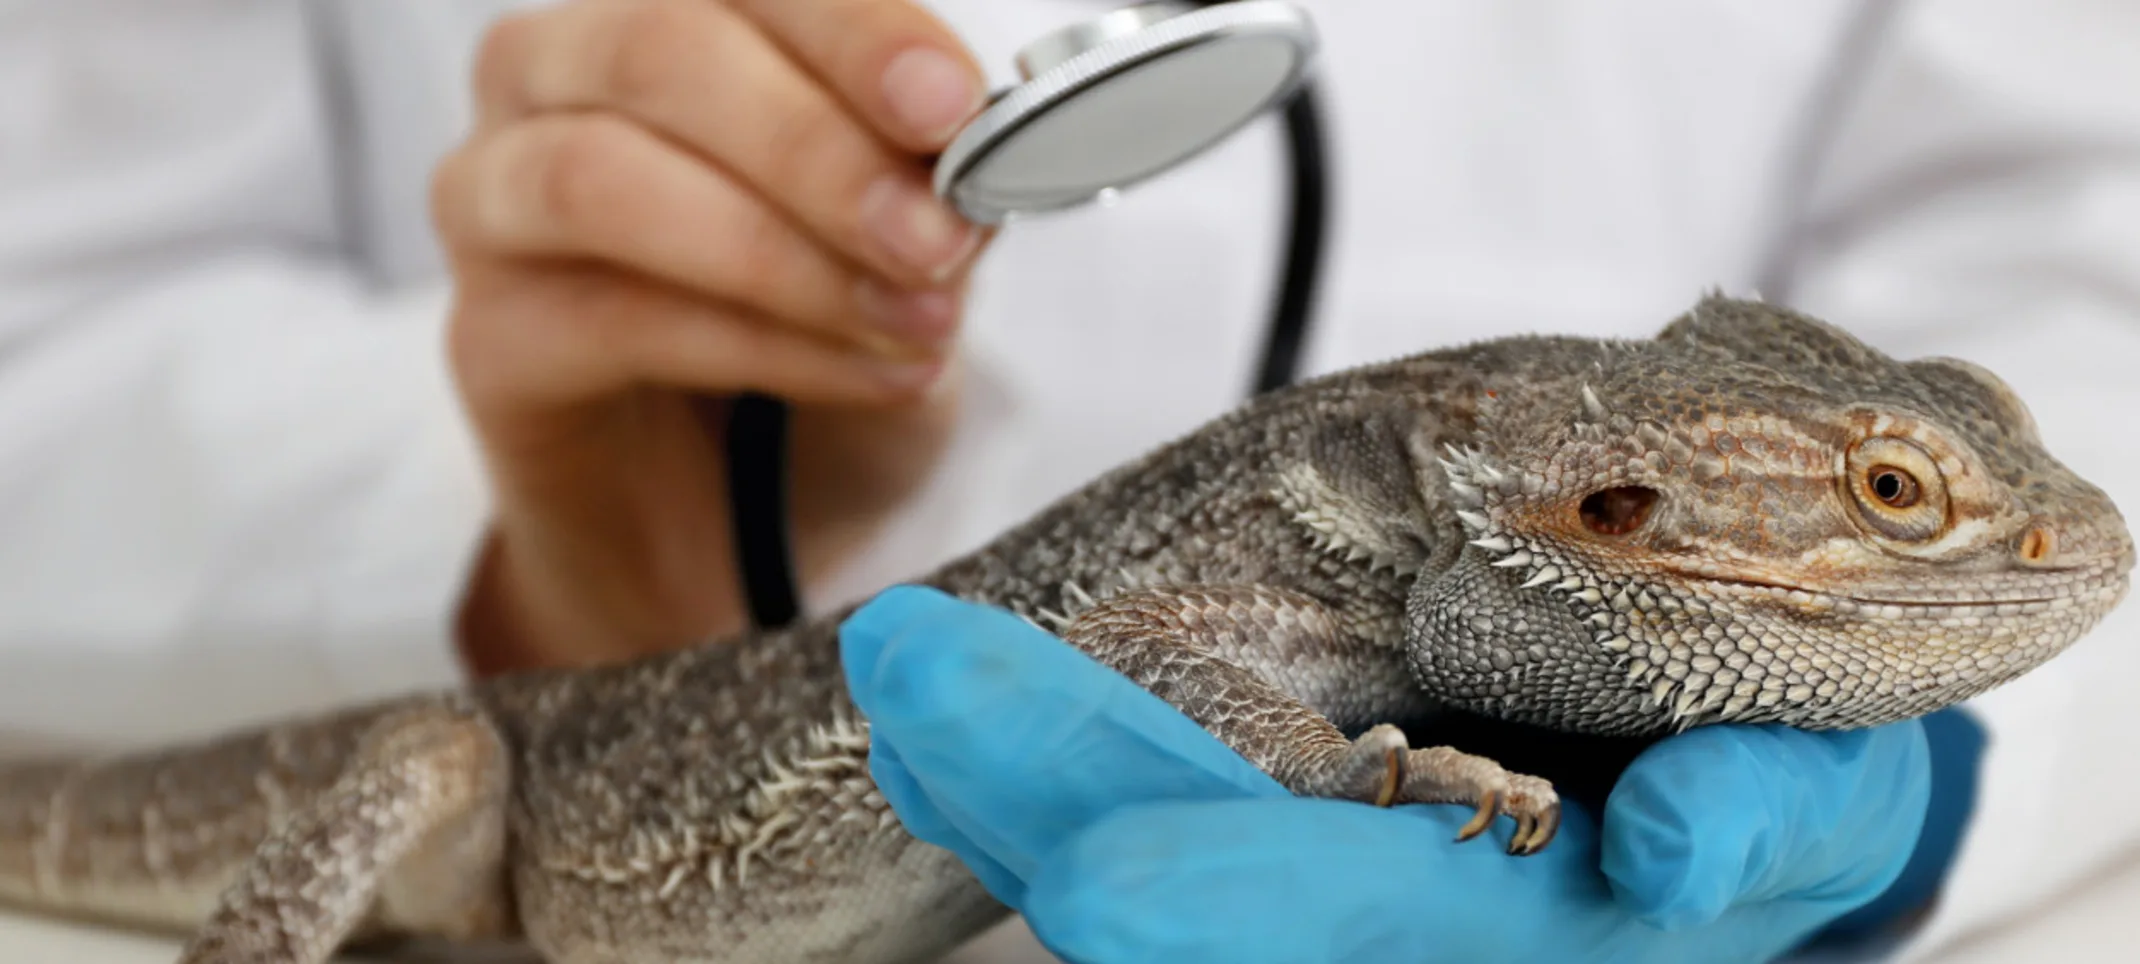 Doctor checking up on lizard